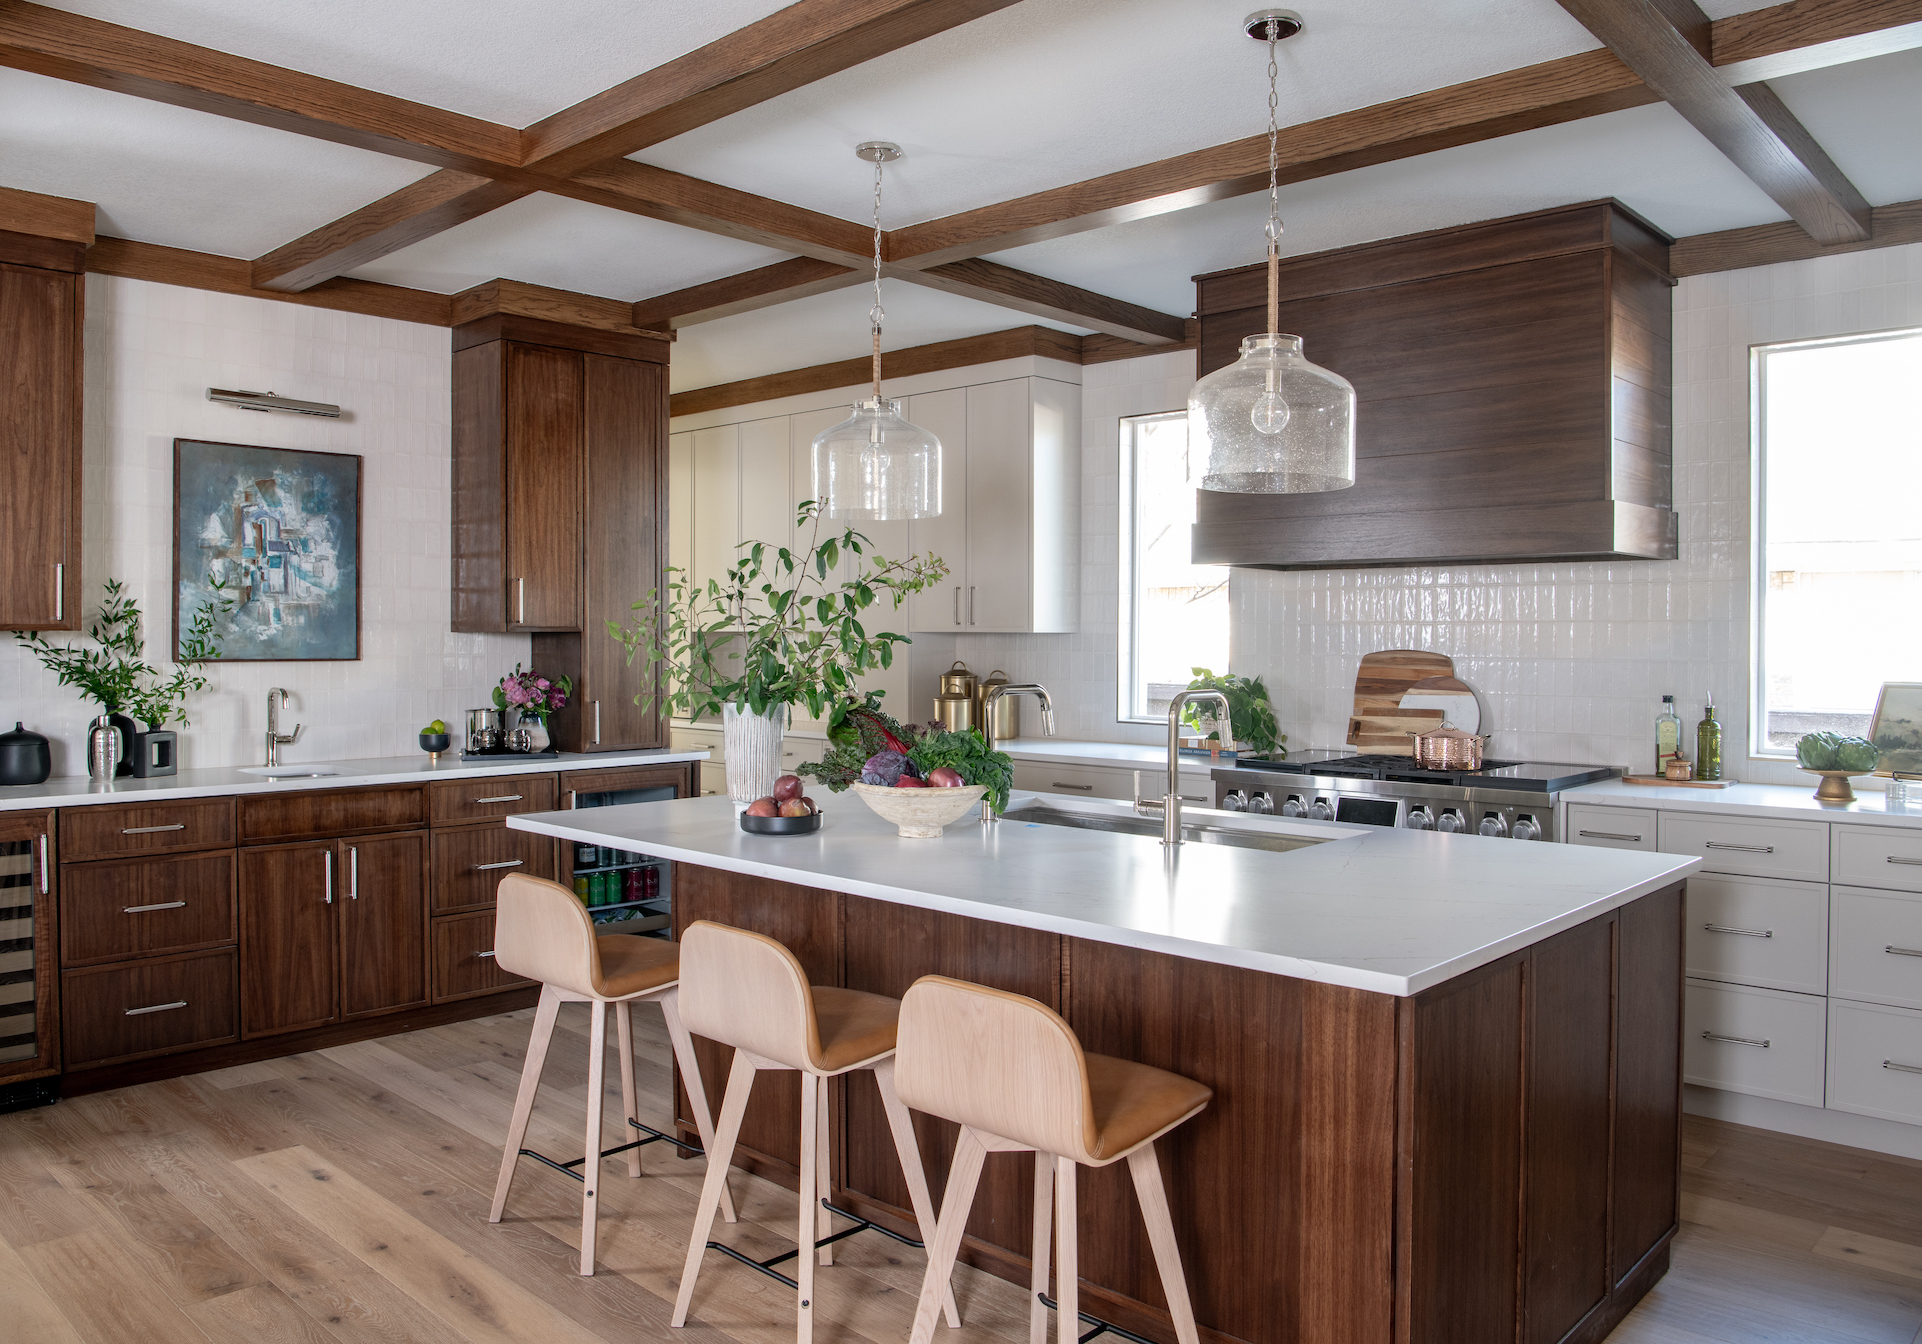 A kitchen with wood cabinets and a center island.